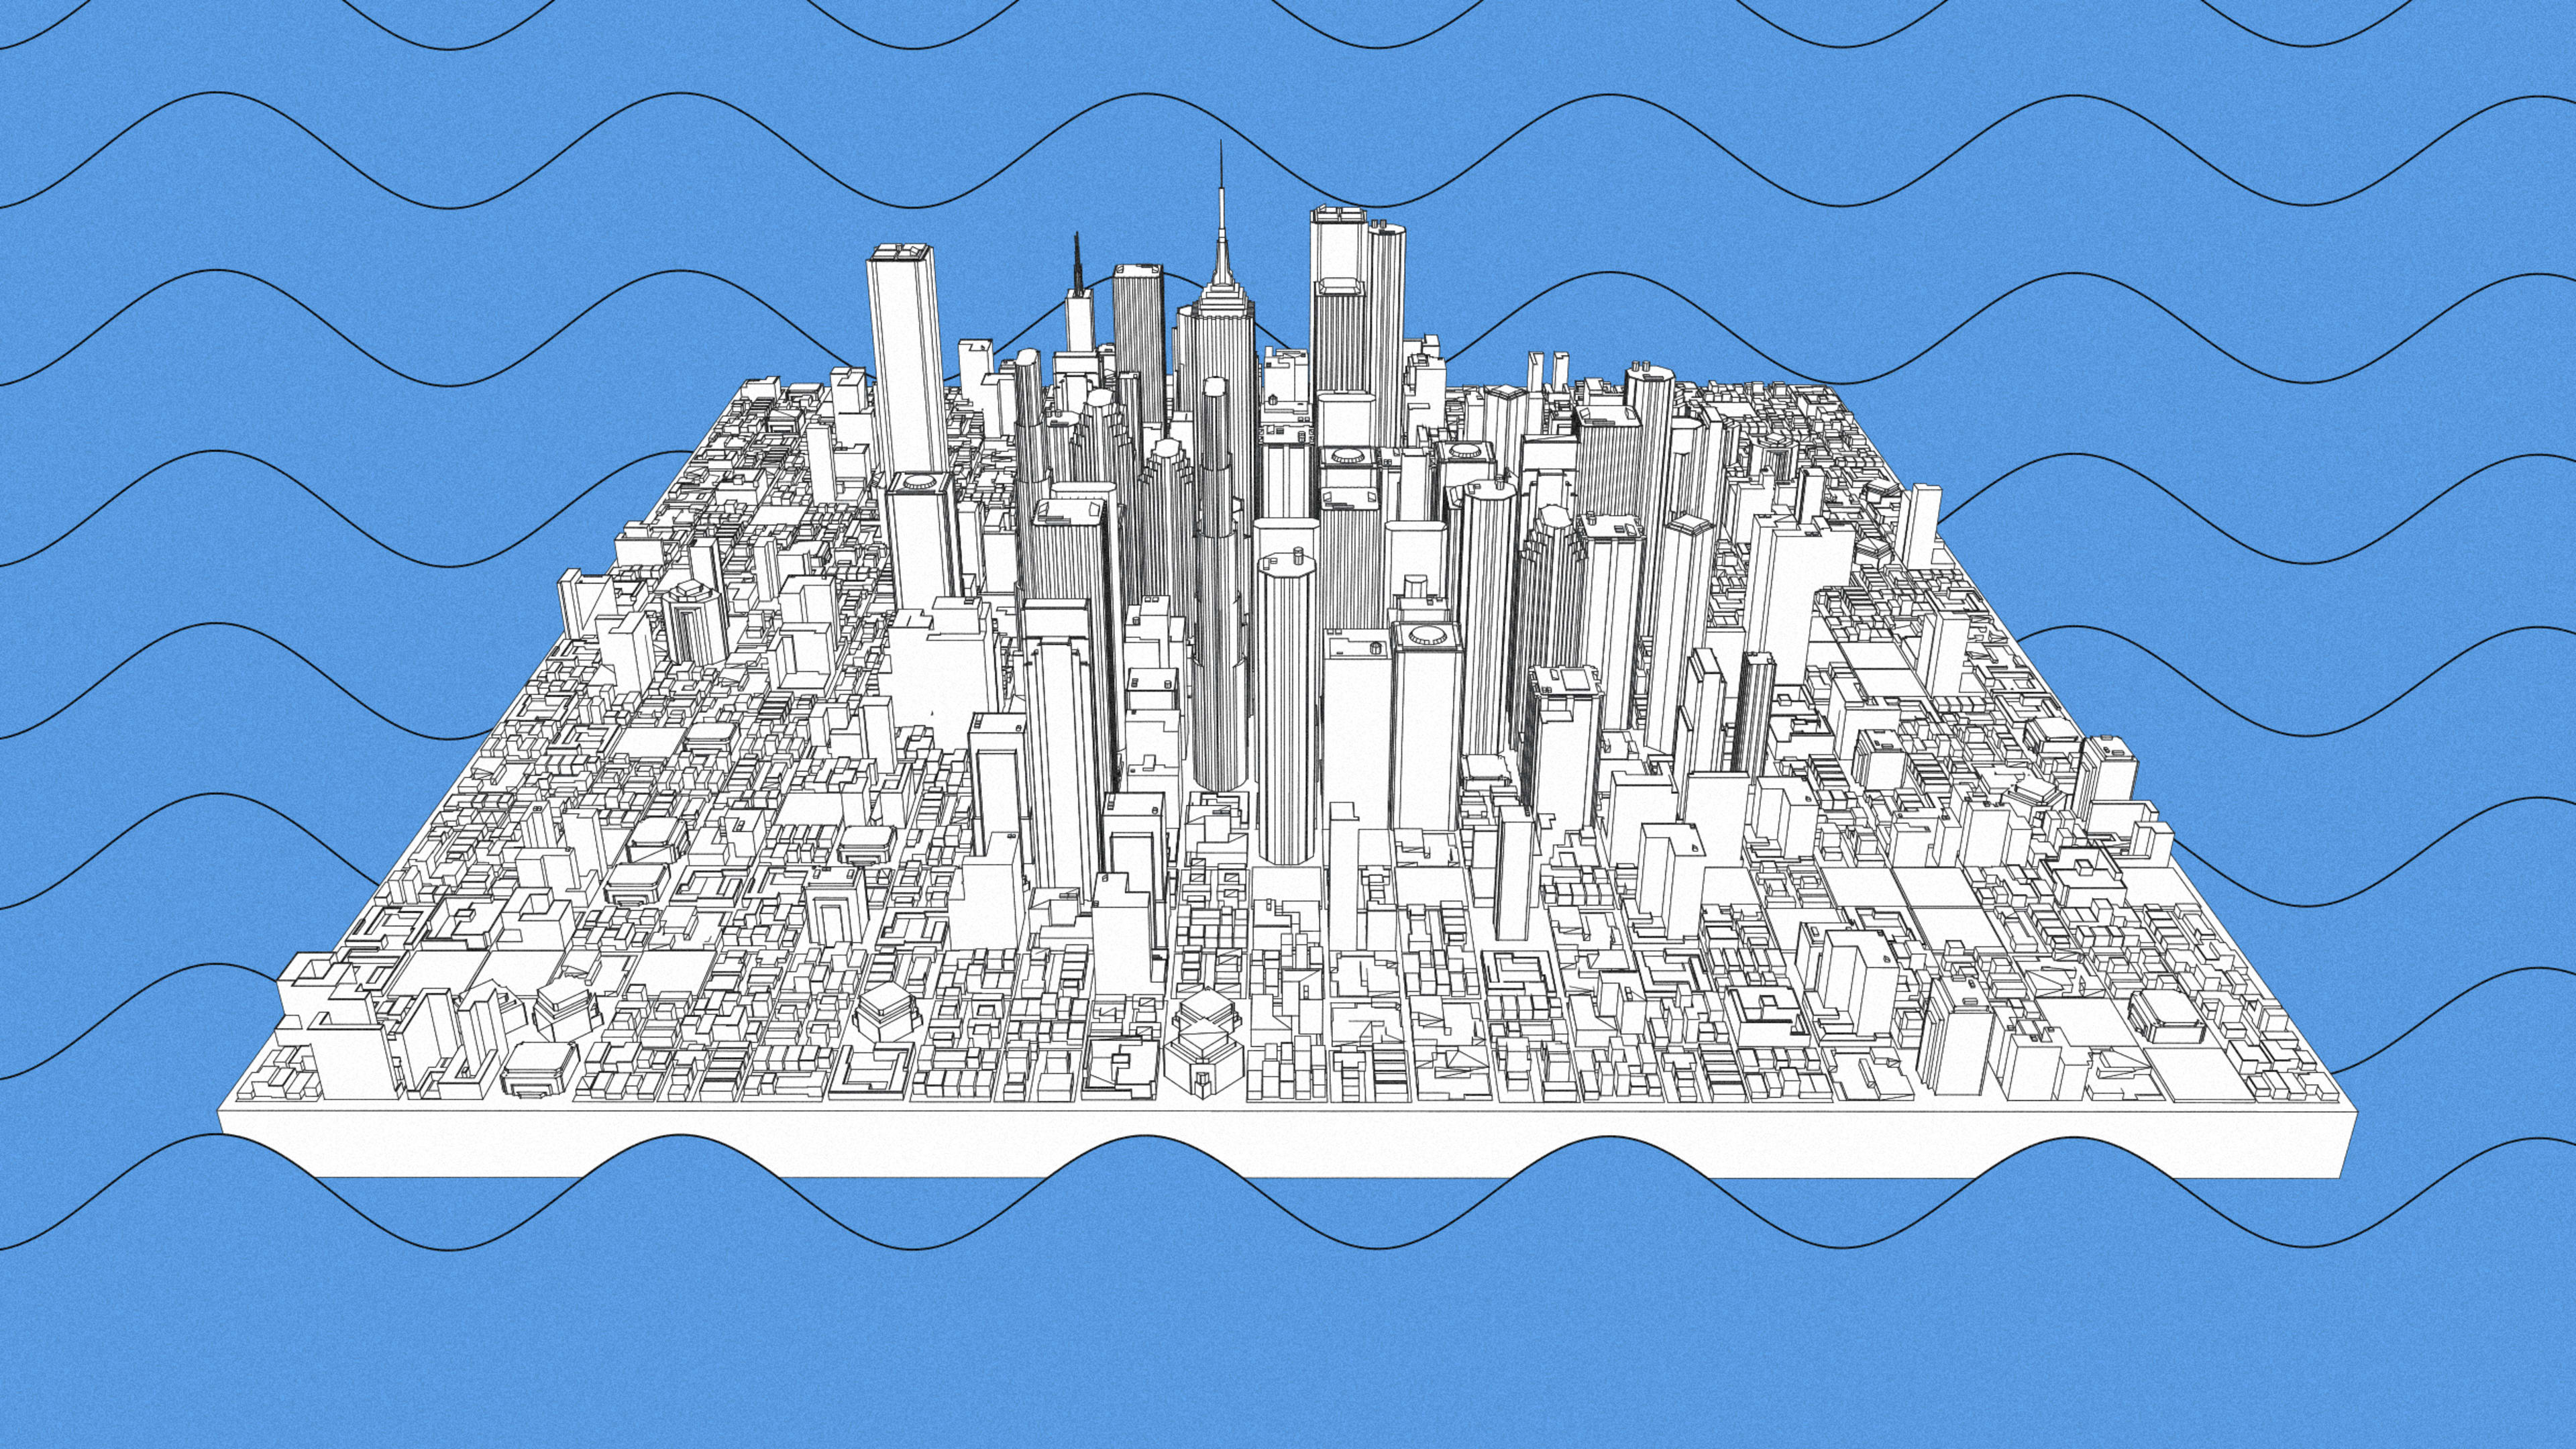 I study floating cities. I’m convinced offshore living is the future